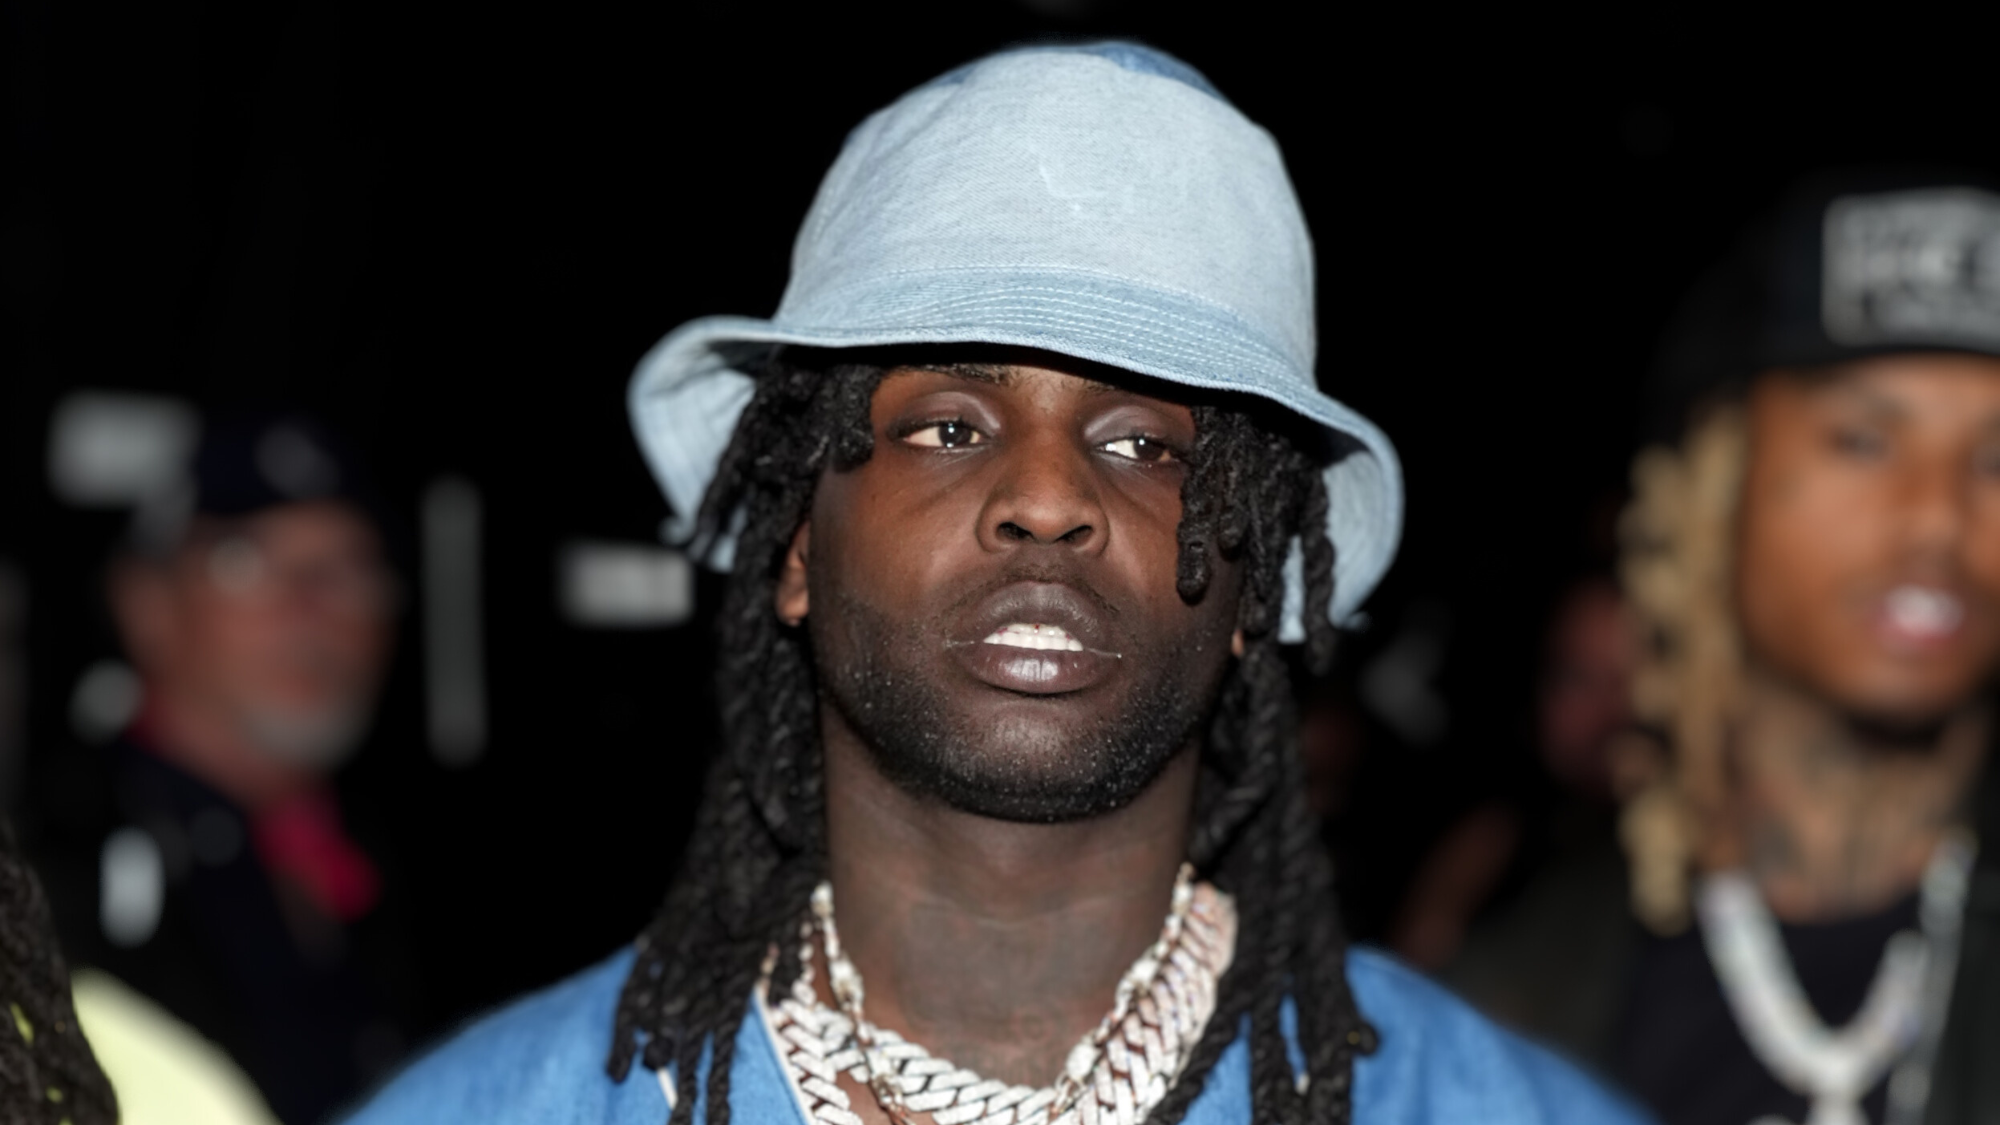 Chief Keef Postpones Entire Tour Hours Before It Begins Due To “Medical Emergency”